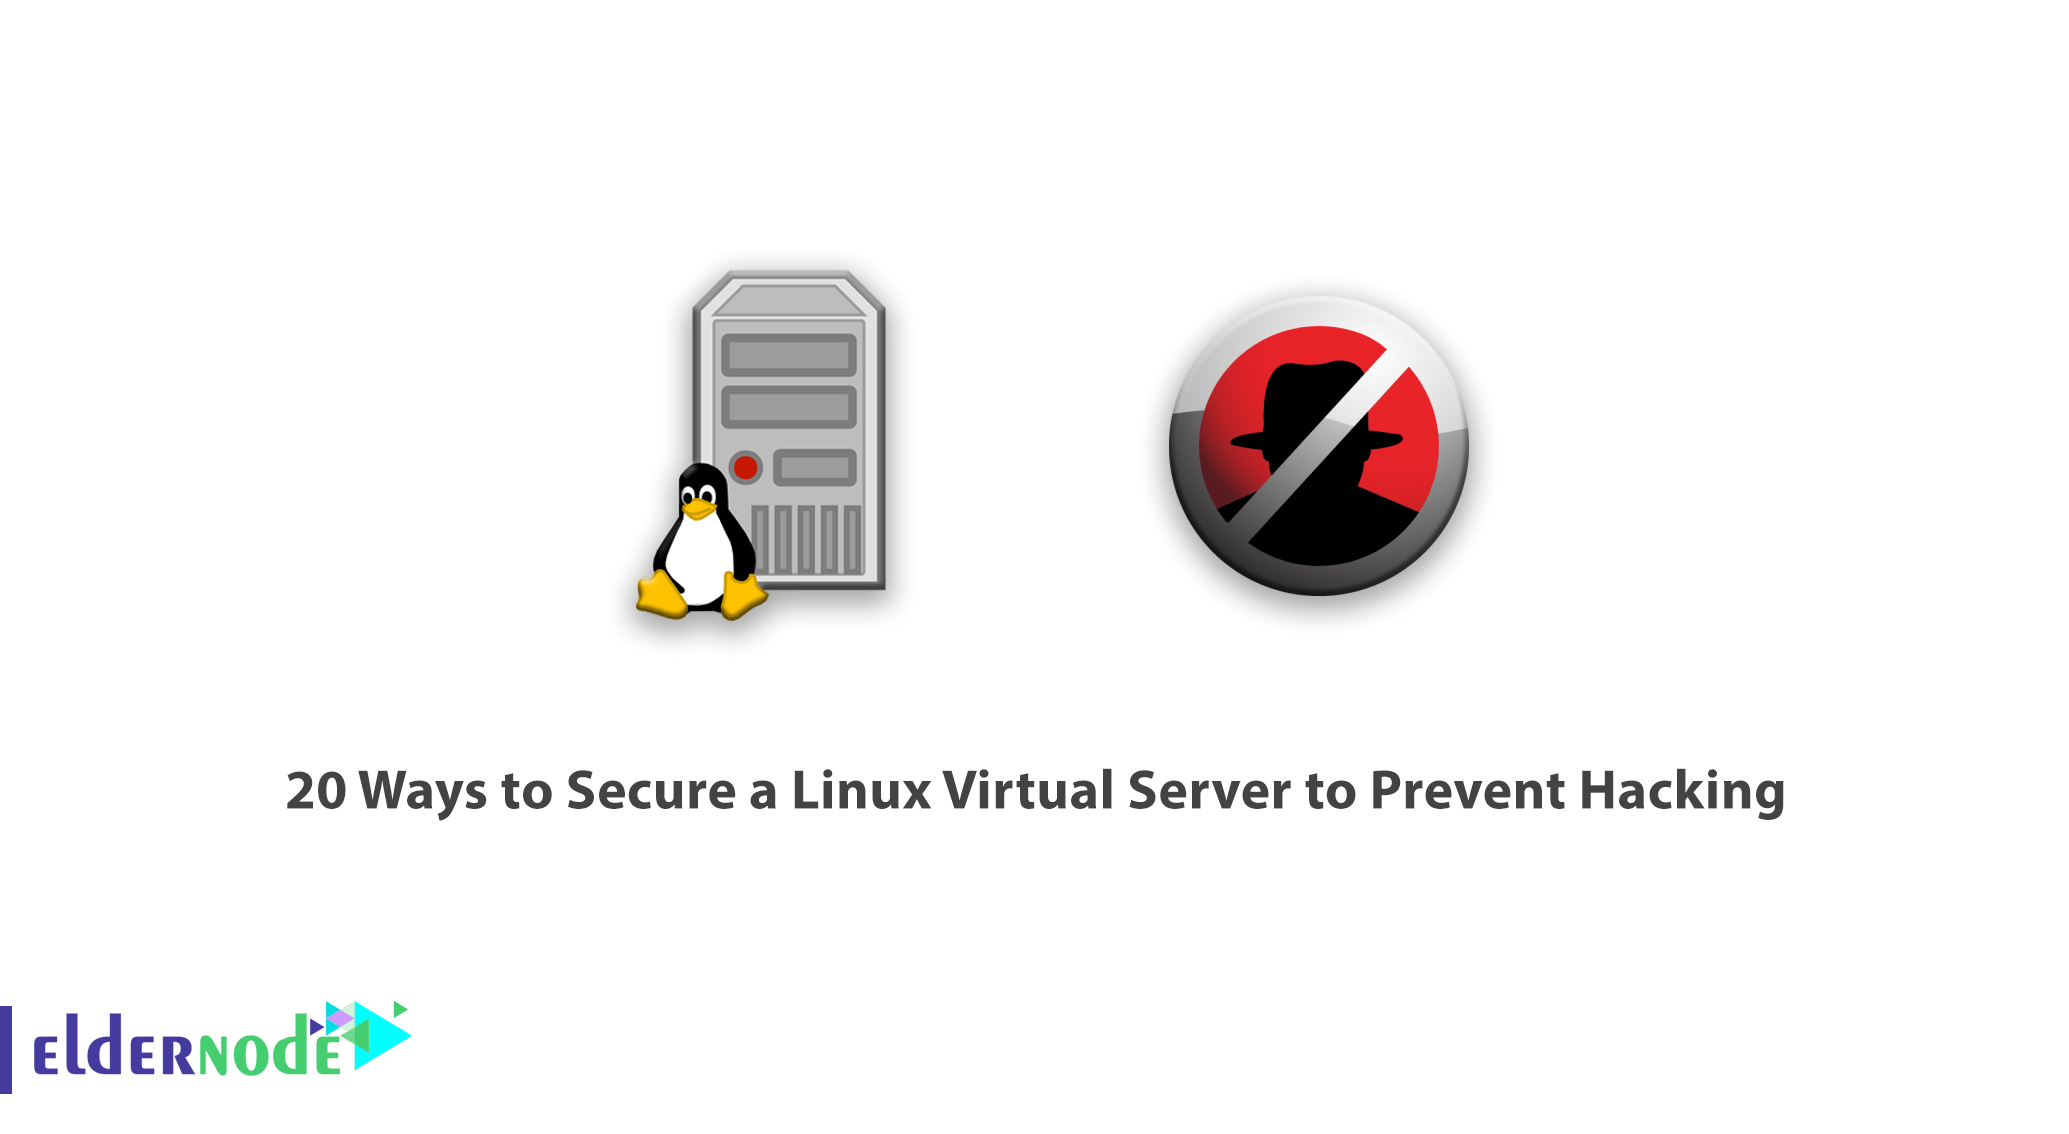 20 Ways to Secure a Linux Virtual Server to Prevent Hacking